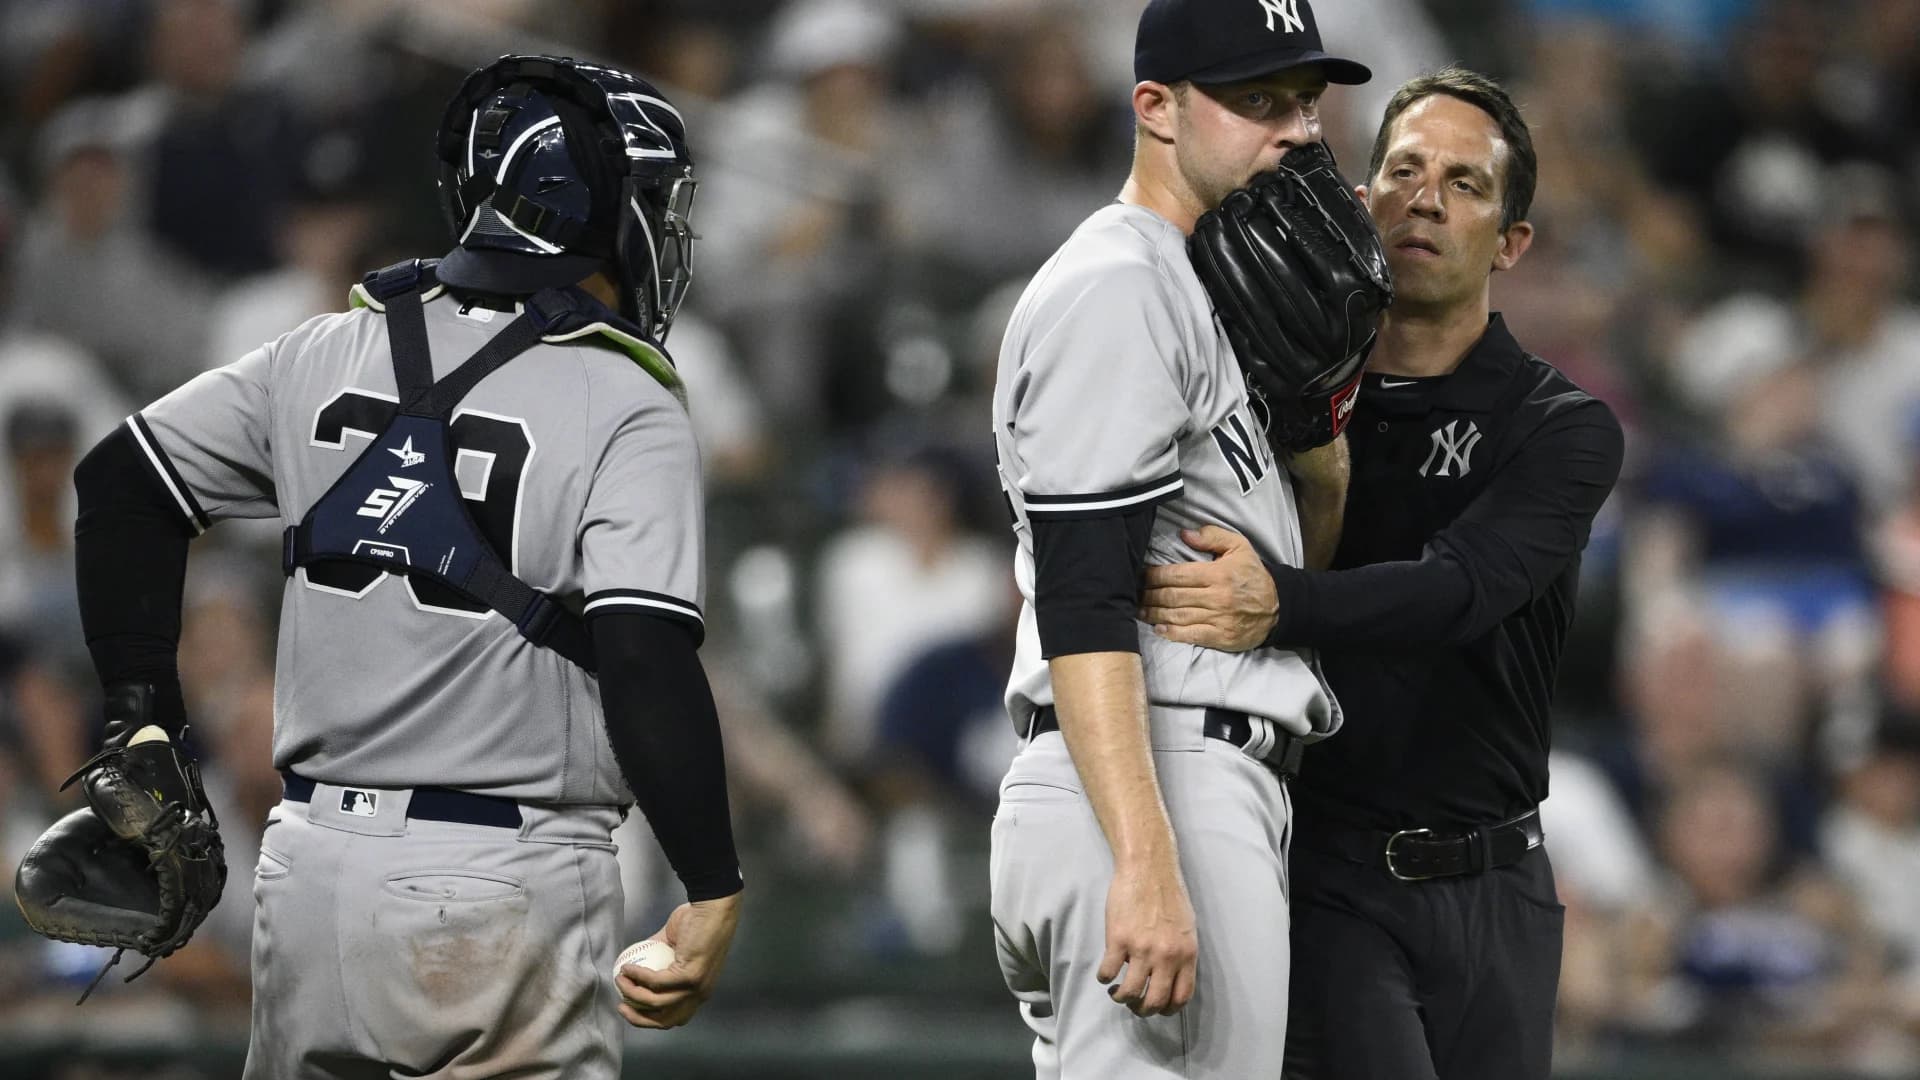 Yankees reliever King out for season with fractured elbow